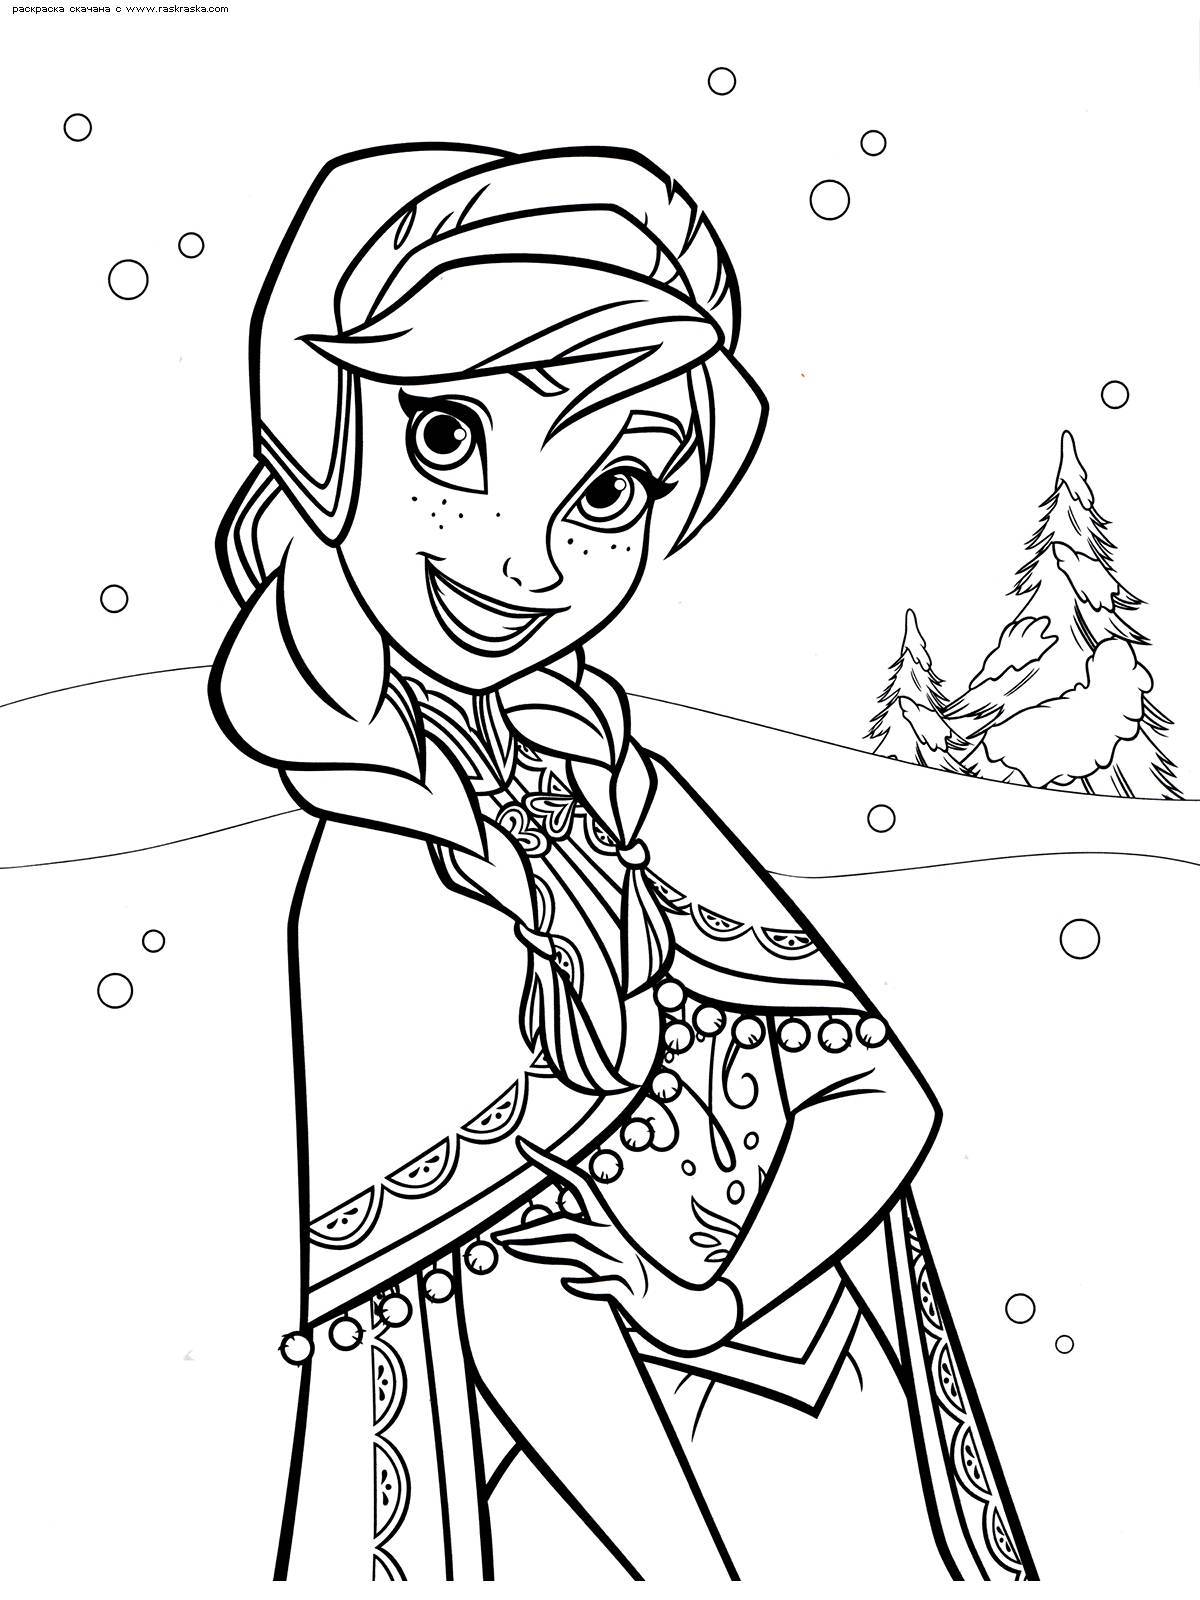 Elsa and anna fairy tale coloring book for kids